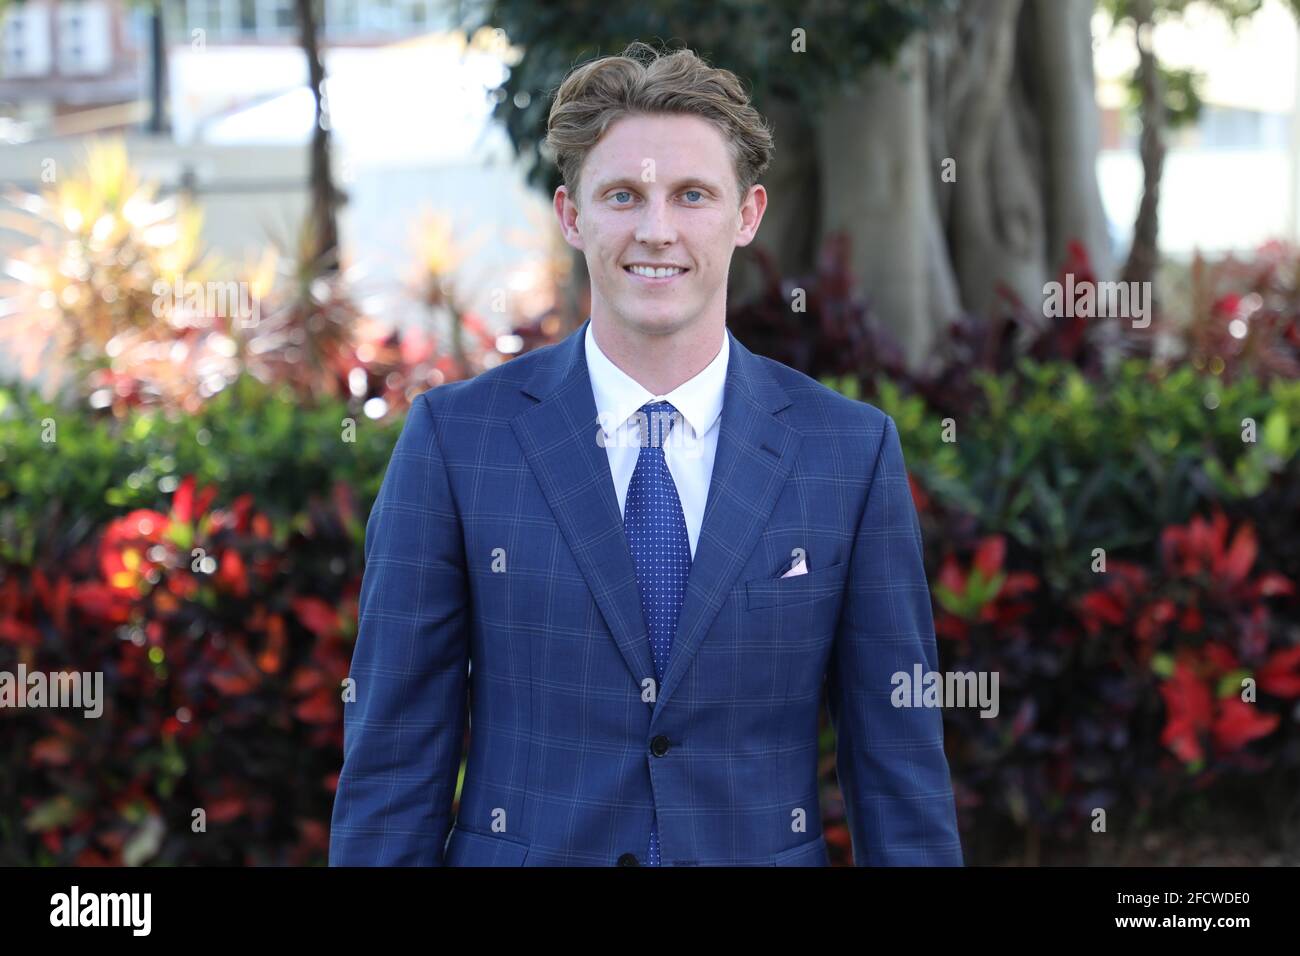 Sydney, Australia. 24th April 2021. Lachie Whitfield, GWS Giants AFL Player attends the final event of the Sydney Autumn Racing Carnival - Schweppes All Aged Stakes Day at Royal Randwick racecourse. Credit: Richard Milnes/Alamy Live News Stock Photo